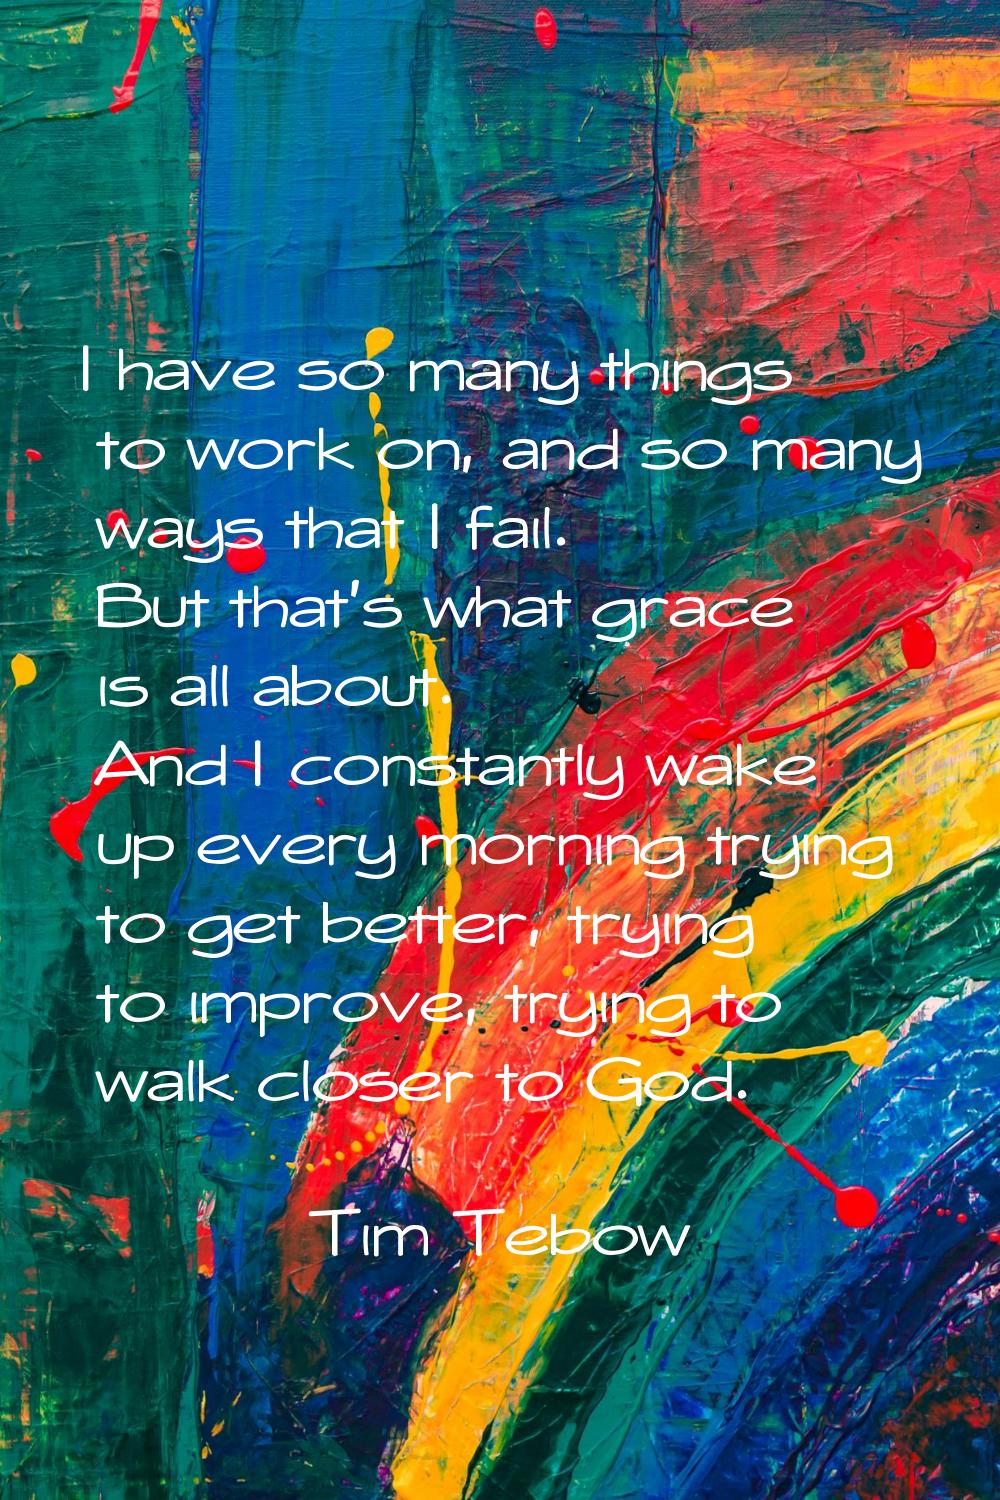 I have so many things to work on, and so many ways that I fail. But that's what grace is all about.